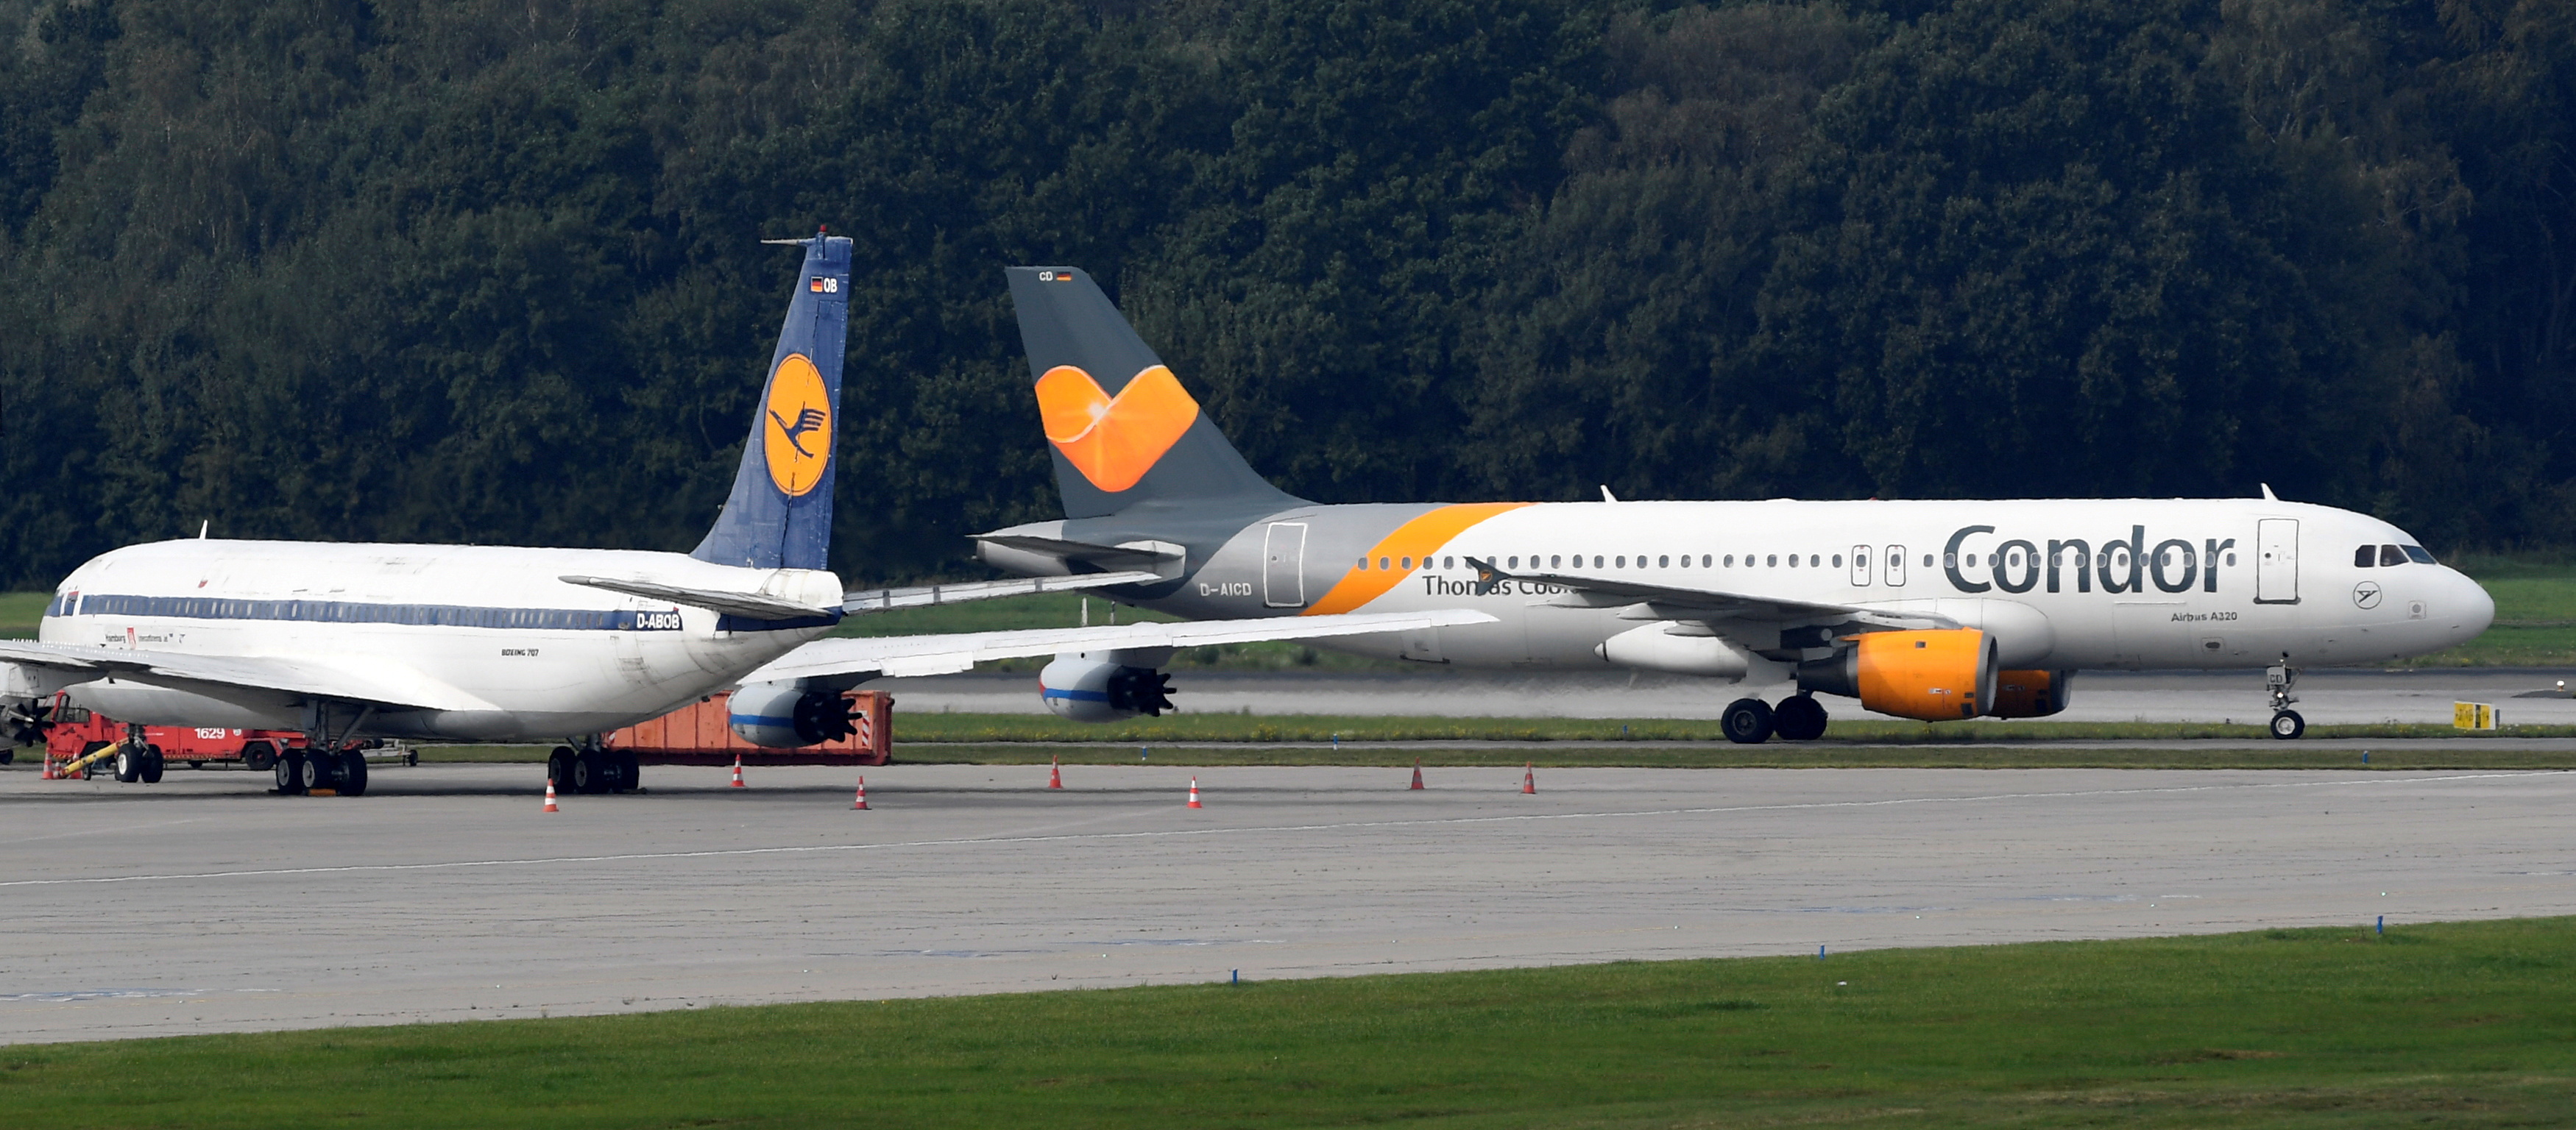 An Airbus A320 of Condor Airlines passes a Lufthansa plane as it lands at the airport in Hamburg, Germany September 24, 2019. REUTERS/Fabian Bimmer/File Photo